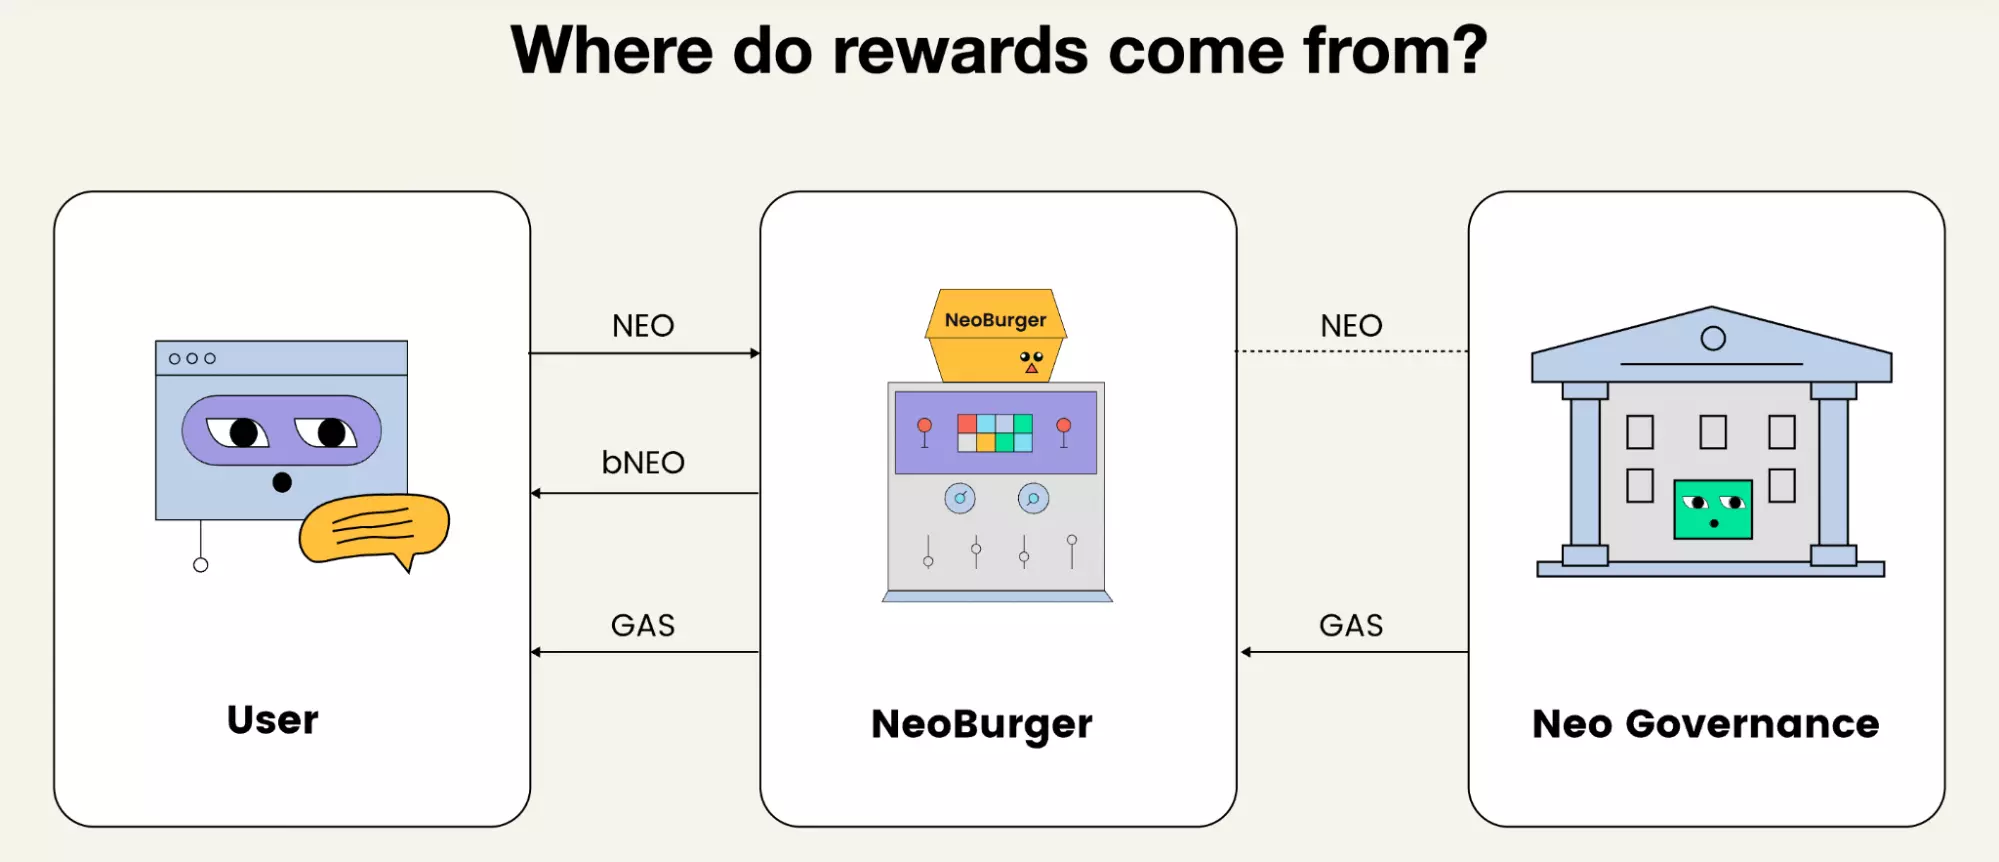 1_neo_where_do_rewards_come_from.webp